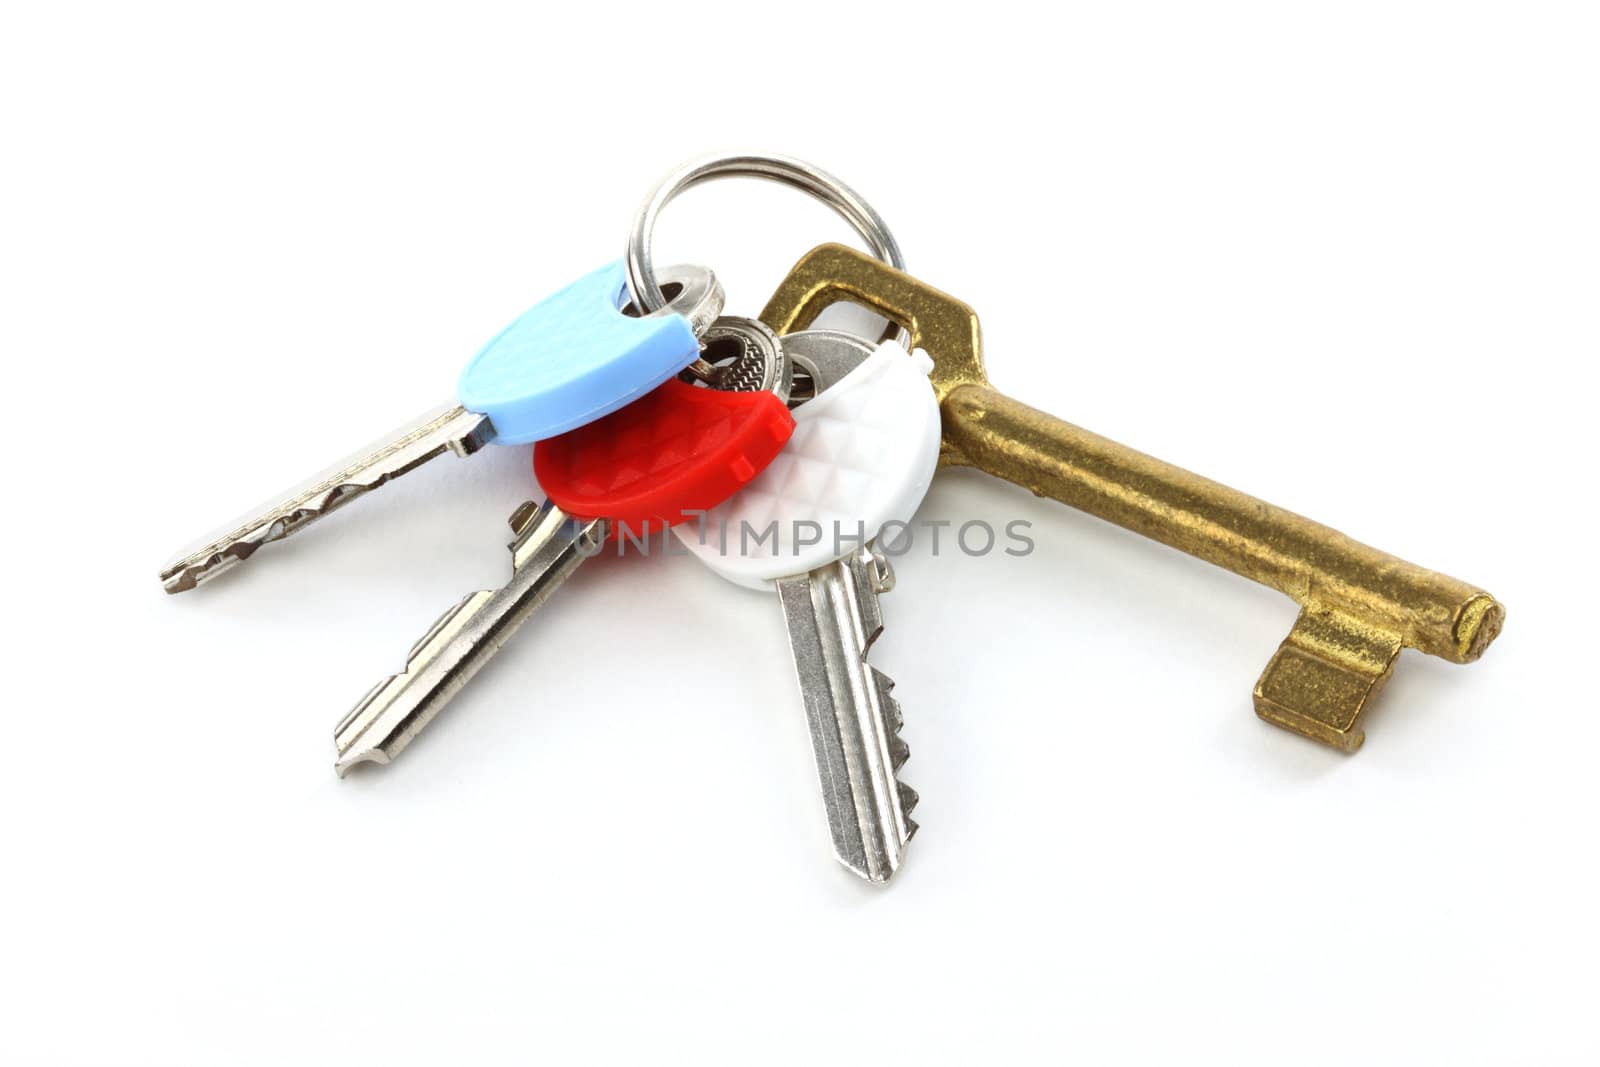 bunch of keys close up over white background